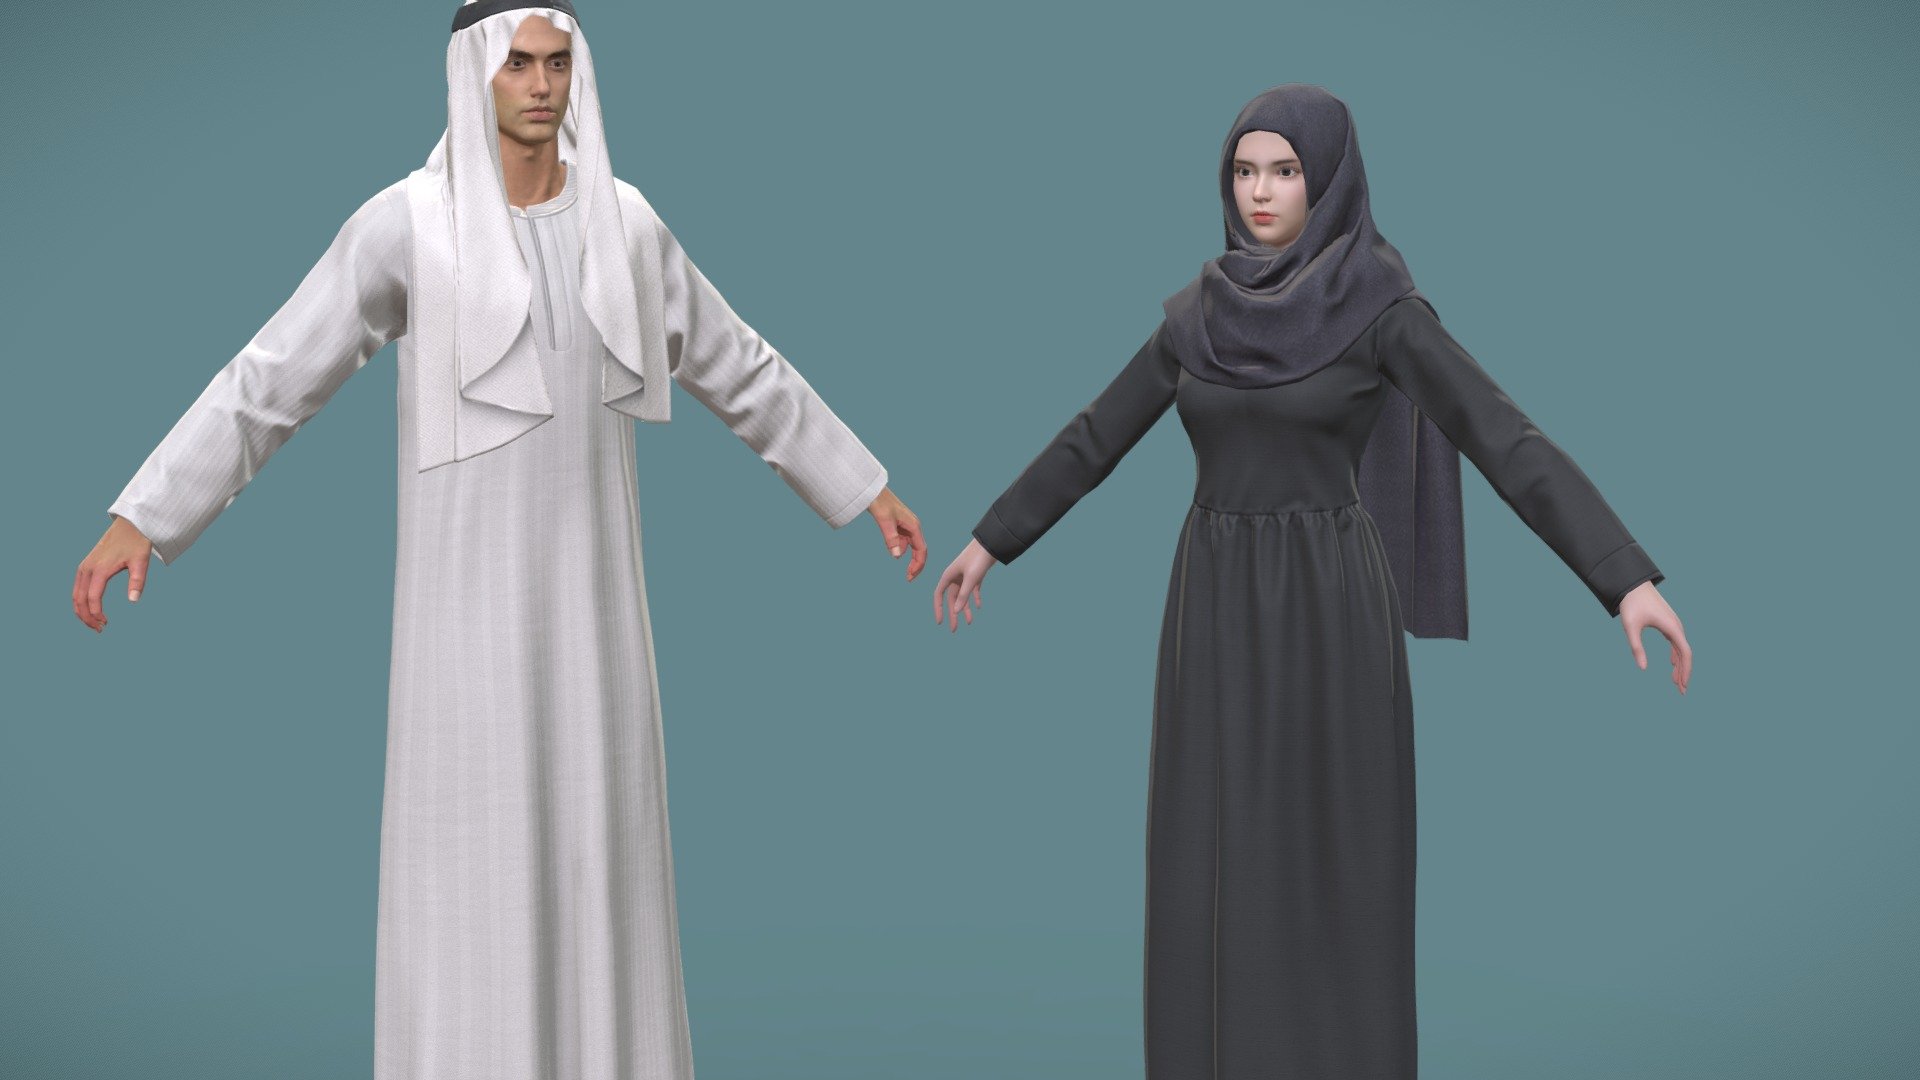 [Game Assets] Saudi Arabia clothing style

File Contains : maya file,  FBX file,  obj file, dae file and all the texture files.

Texture size: Face 4096, Body 4096 Eyes 512 Eyebrows 1024 Eyelashes dress 2048 Shoes 2048.tga format.

Skin uses the Specular pbr pipeline , and  Equipment part uses the metalness pbr pipeline .

The skin part covered by the body is deleted.

Hope you like my work~ - [Game Assets] Saudi Arabia clothing style A pose - Buy Royalty Free 3D model by Vincent Page (@vincentpage) 3d model